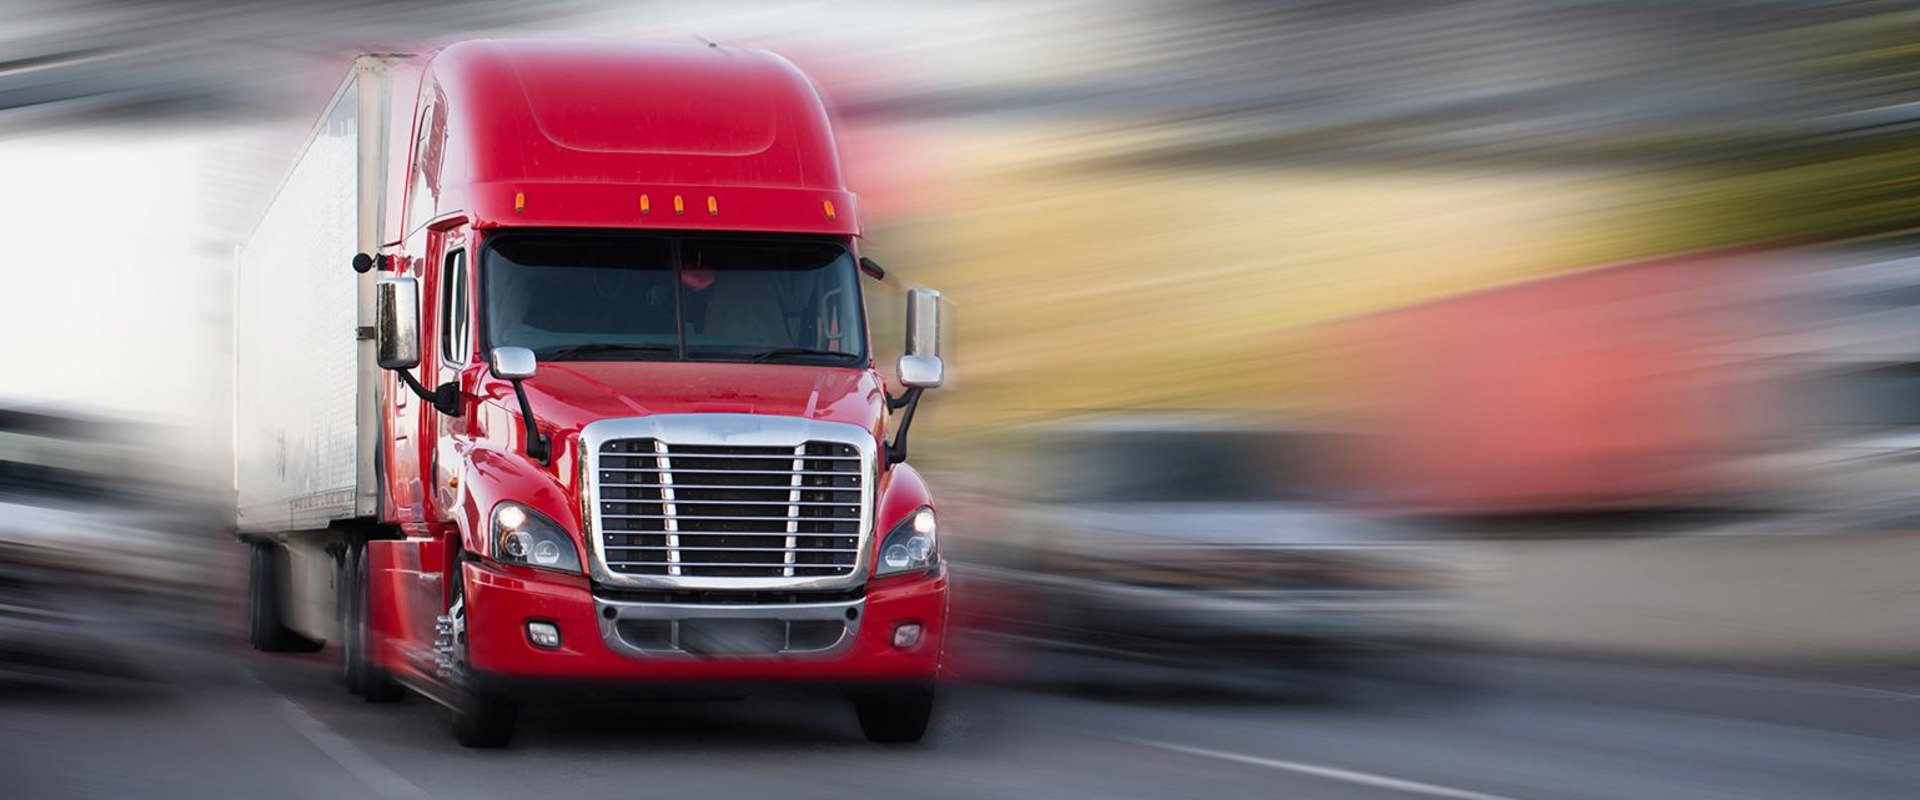 Why is trucking so important?